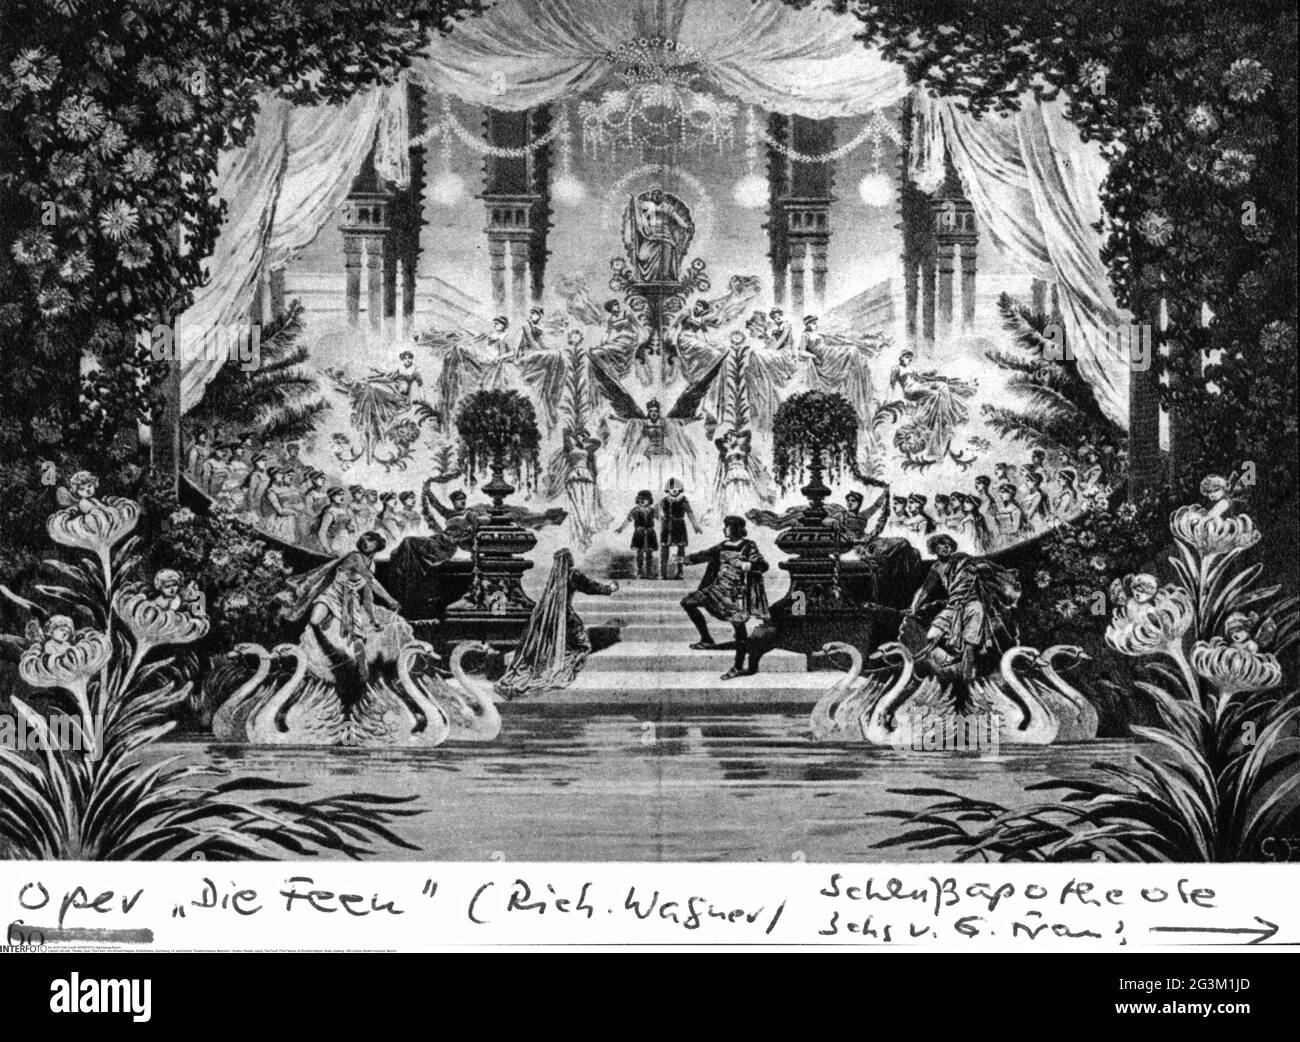 theatre / theater, opera, "Die Feen" (The Fairies), by Richard Wagner,  finale, drawing, 19th century, ARTIST'S COPYRIGHT HAS NOT TO BE CLEARED  Stock Photo - Alamy